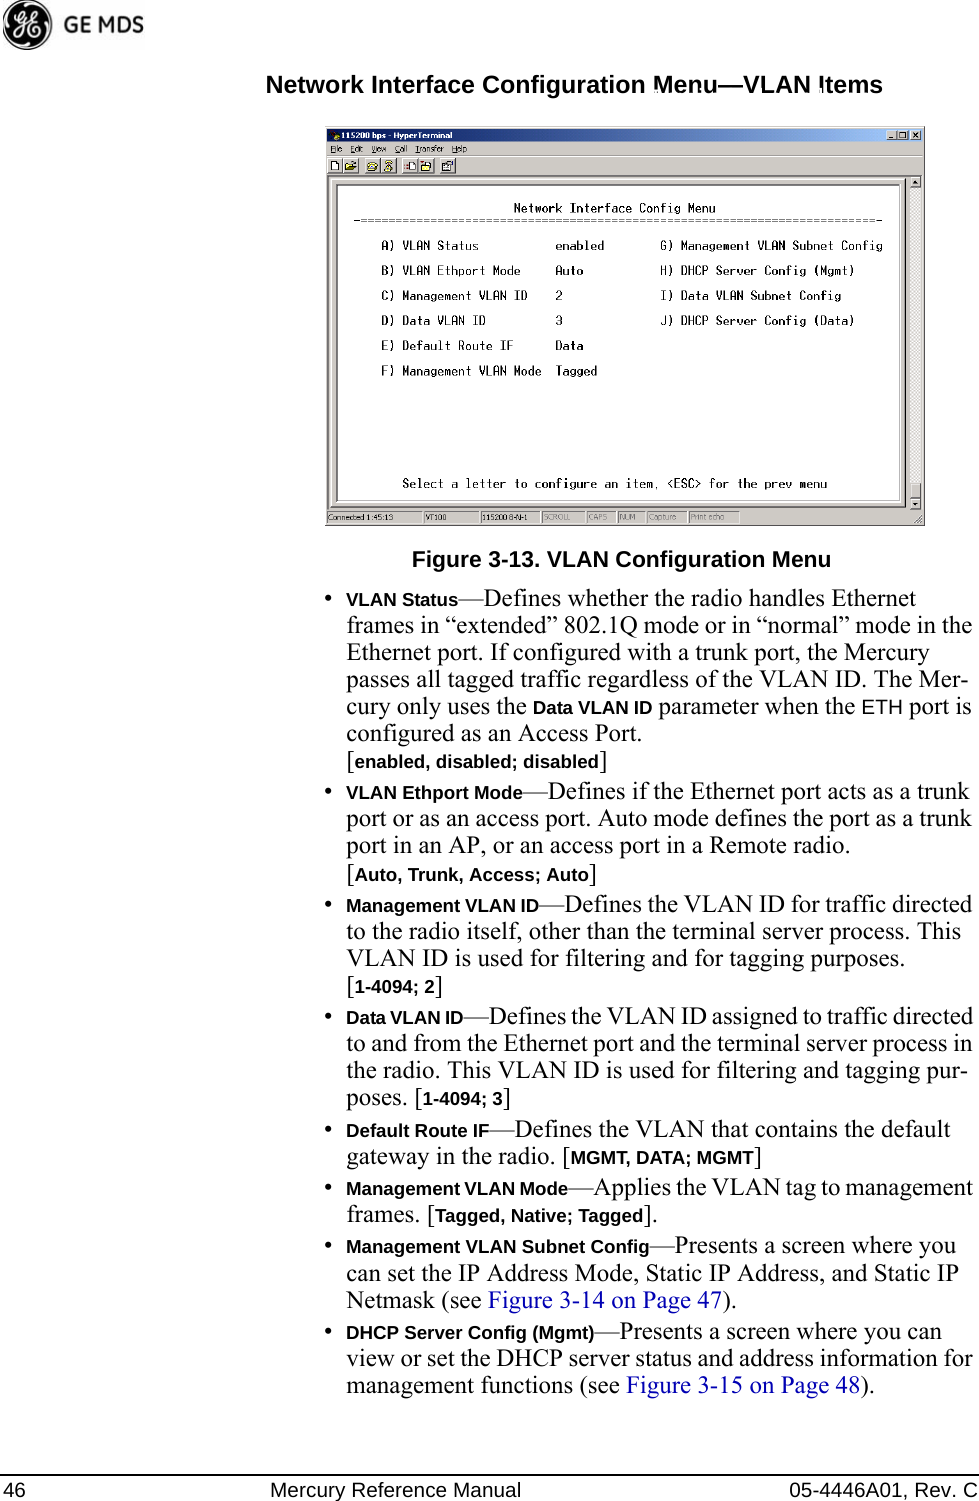 46 Mercury Reference Manual 05-4446A01, Rev. CNetwork Interface Configuration Menu—VLAN ItemsInvisible place holderFigure 3-13. VLAN Configuration Menu•VLAN Status—Defines whether the radio handles Ethernet frames in “extended” 802.1Q mode or in “normal” mode in the Ethernet port. If configured with a trunk port, the Mercury passes all tagged traffic regardless of the VLAN ID. The Mer-cury only uses the Data VLAN ID parameter when the ETH port is configured as an Access Port.[enabled, disabled; disabled]•VLAN Ethport Mode—Defines if the Ethernet port acts as a trunk port or as an access port. Auto mode defines the port as a trunk port in an AP, or an access port in a Remote radio. [Auto, Trunk, Access; Auto]•Management VLAN ID—Defines the VLAN ID for traffic directed to the radio itself, other than the terminal server process. This VLAN ID is used for filtering and for tagging purposes. [1-4094; 2]•Data VLAN ID—Defines the VLAN ID assigned to traffic directed to and from the Ethernet port and the terminal server process in the radio. This VLAN ID is used for filtering and tagging pur-poses. [1-4094; 3]•Default Route IF—Defines the VLAN that contains the default gateway in the radio. [MGMT, DATA; MGMT]•Management VLAN Mode—Applies the VLAN tag to management frames. [Tagged, Native; Tagged].•Management VLAN Subnet Config—Presents a screen where you can set the IP Address Mode, Static IP Address, and Static IP Netmask (see Figure 3-14 on Page 47).•DHCP Server Config (Mgmt)—Presents a screen where you can view or set the DHCP server status and address information for management functions (see Figure 3-15 on Page 48). 